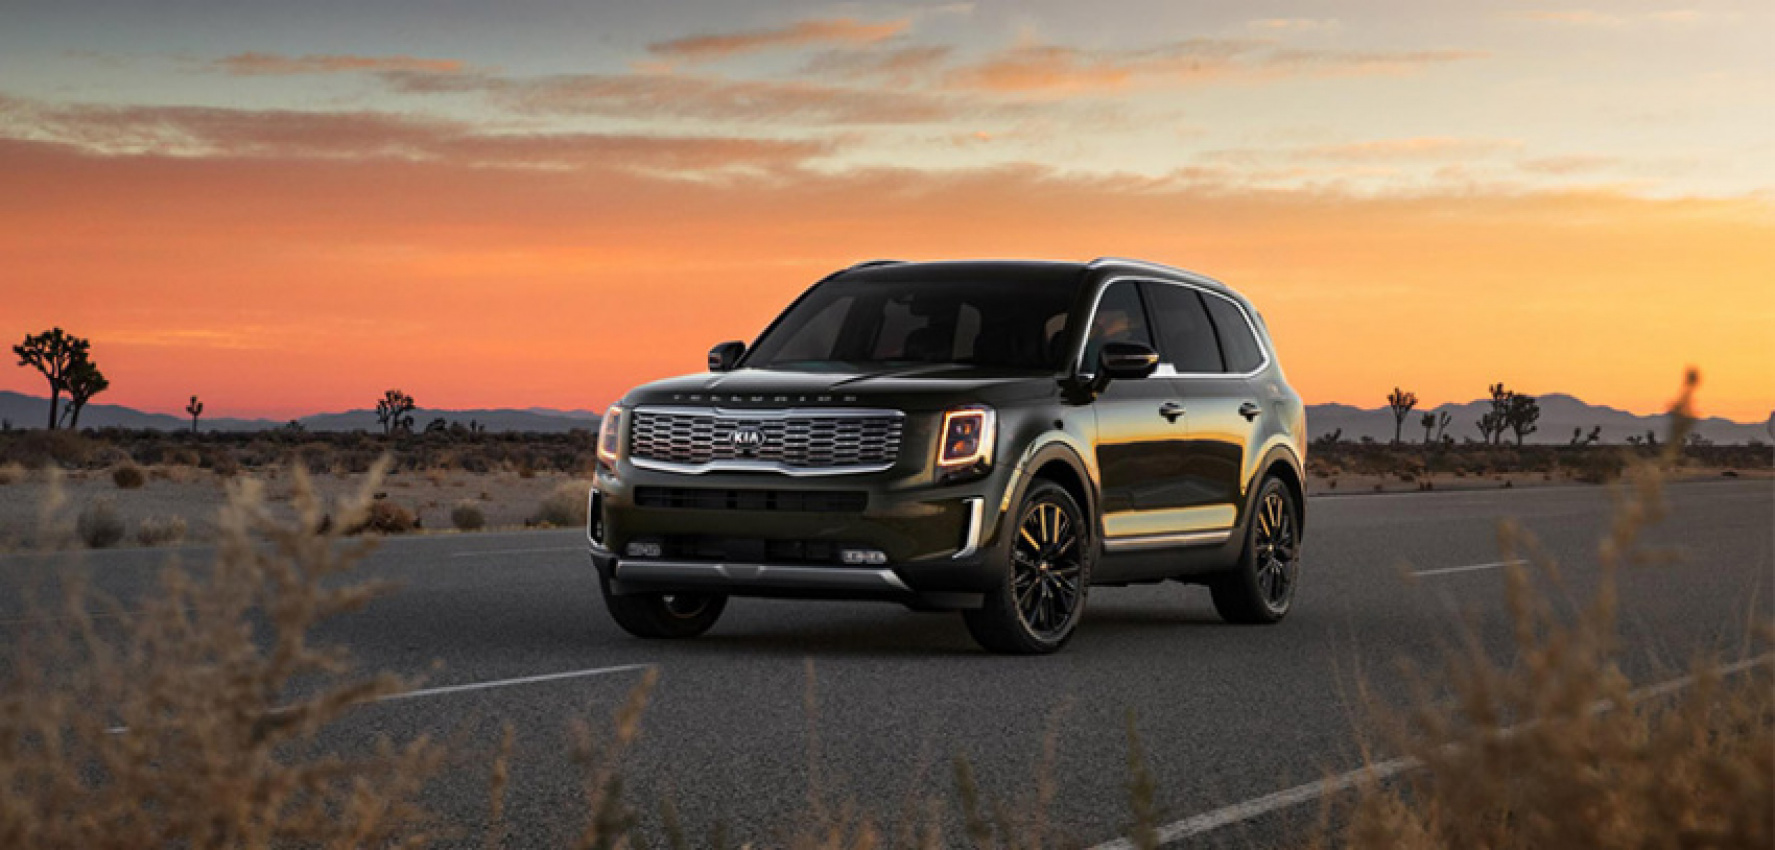 2020 Kia Telluride earns Top Safety Pick Plus award. Here are details